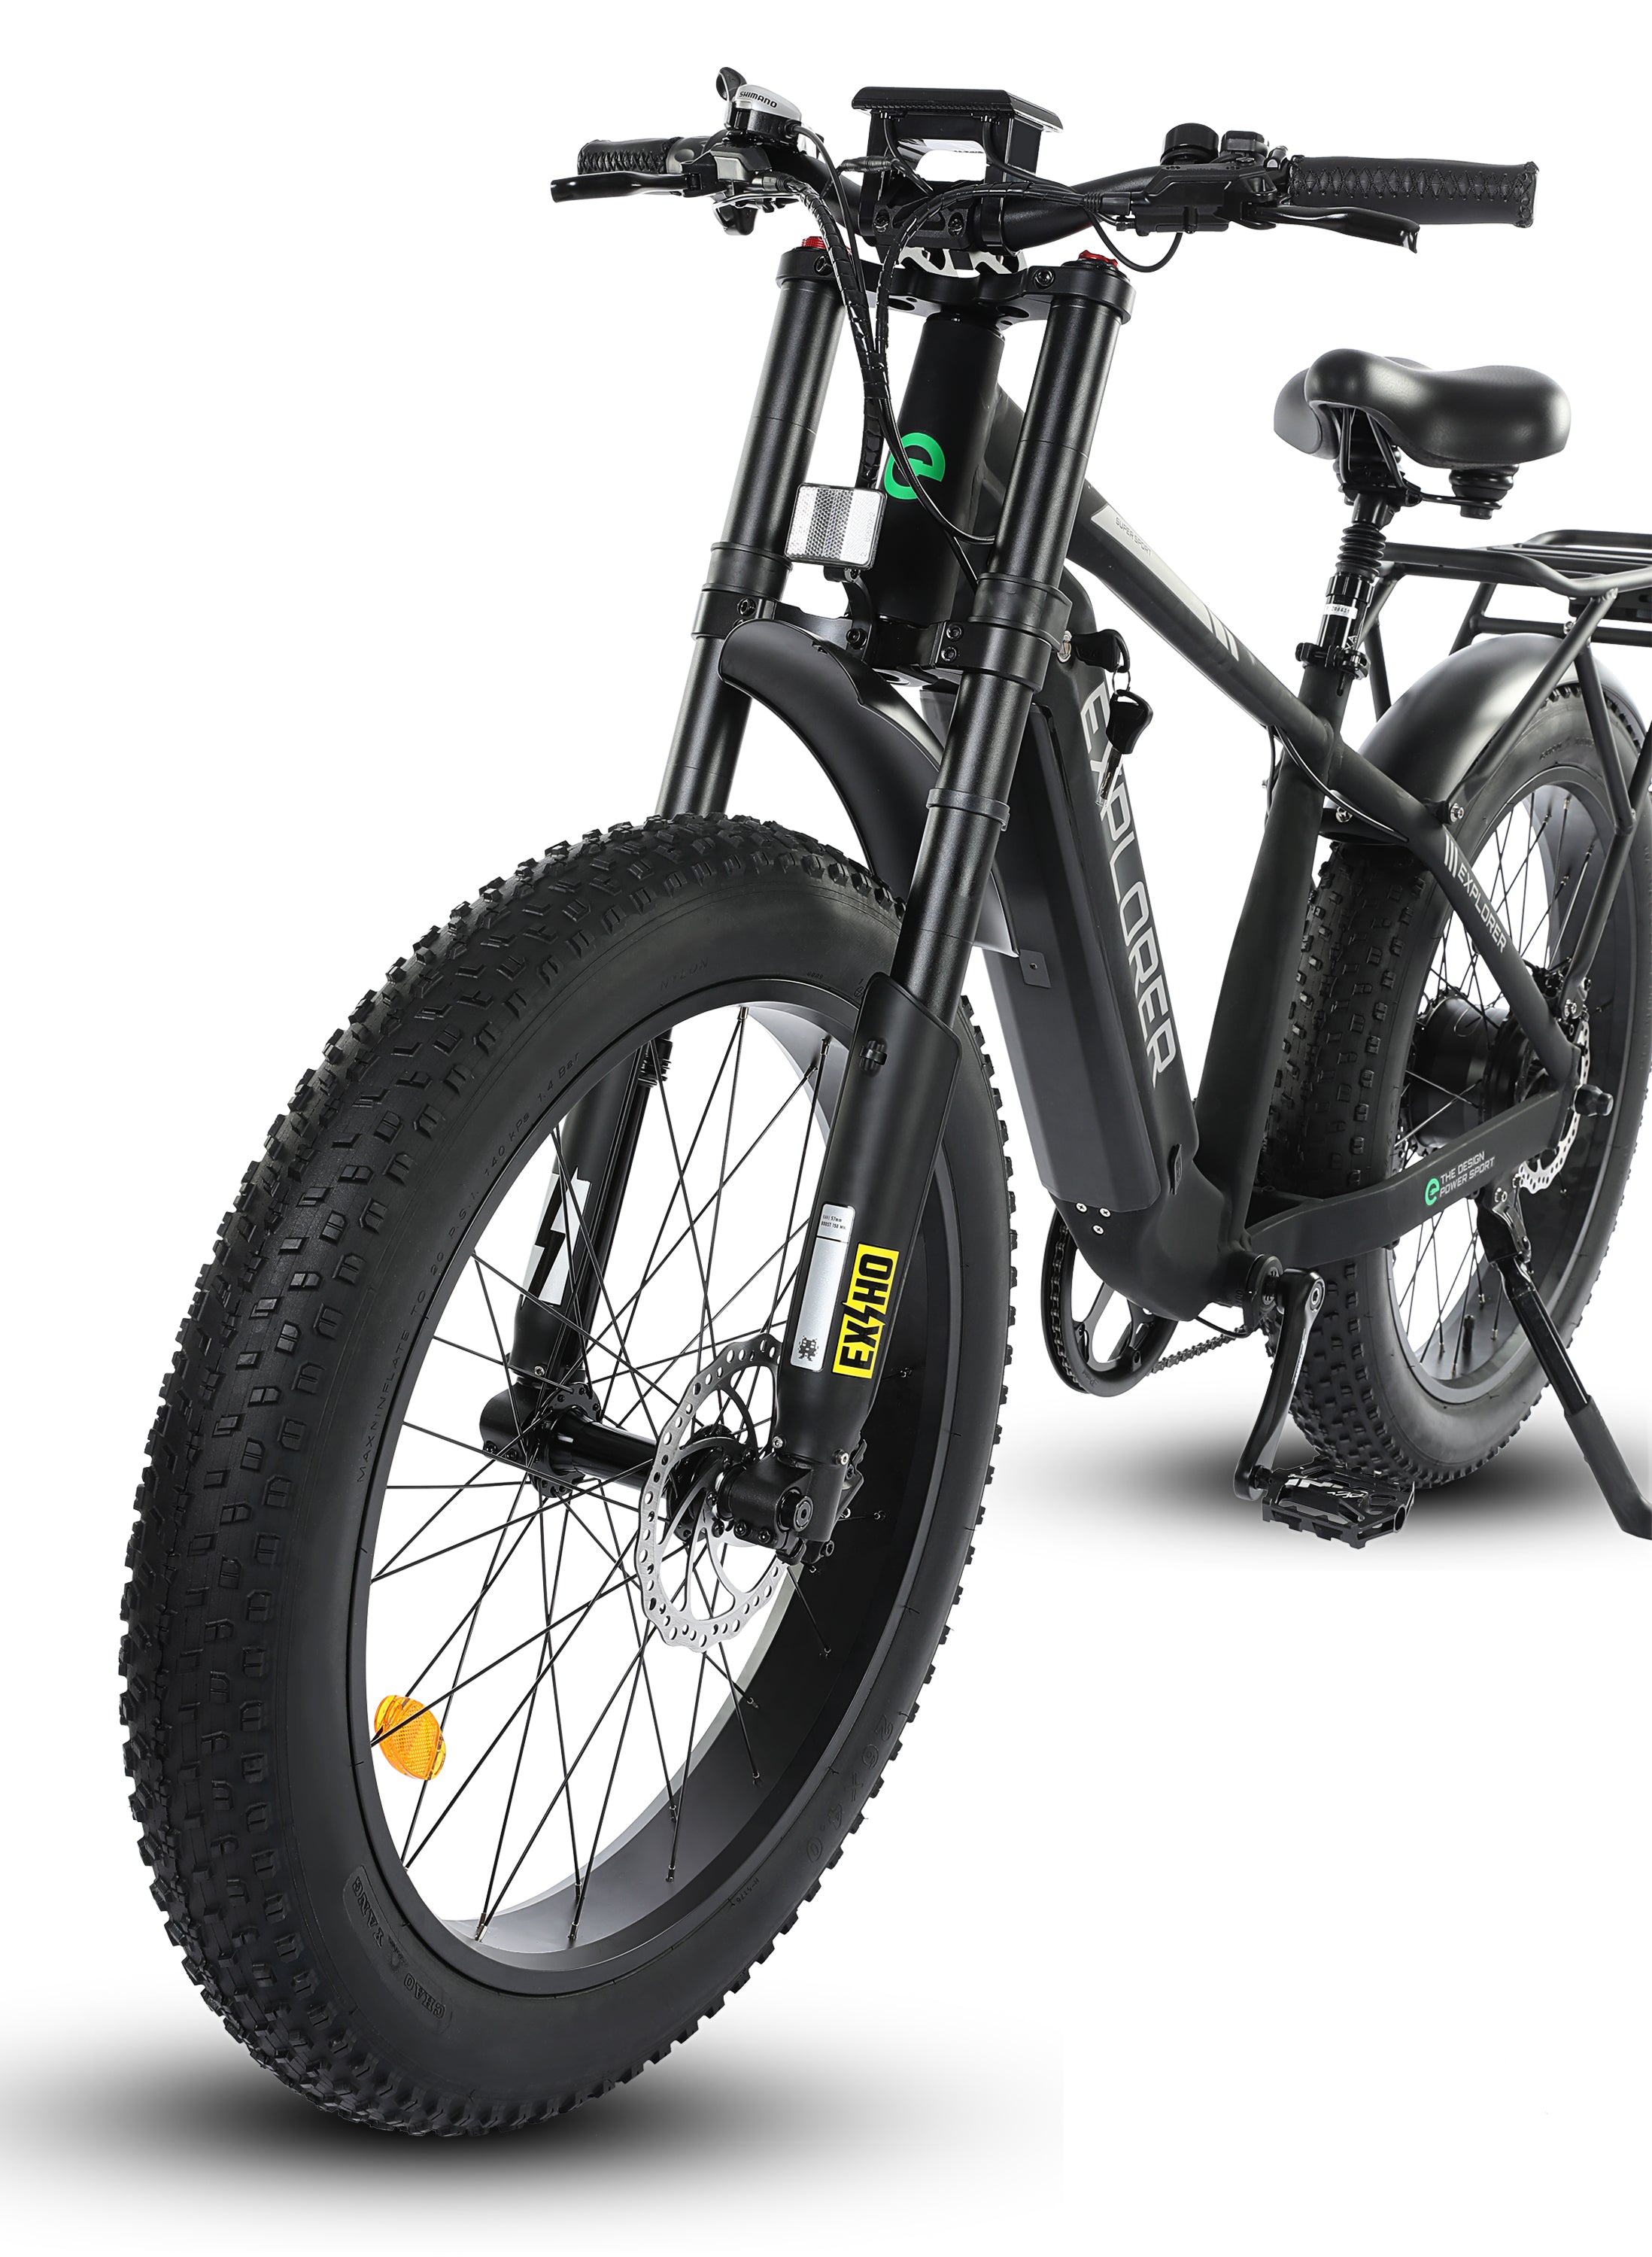 Explorer 26 inches 48V Fat Tire Electric Bike with Rear Rack - 16